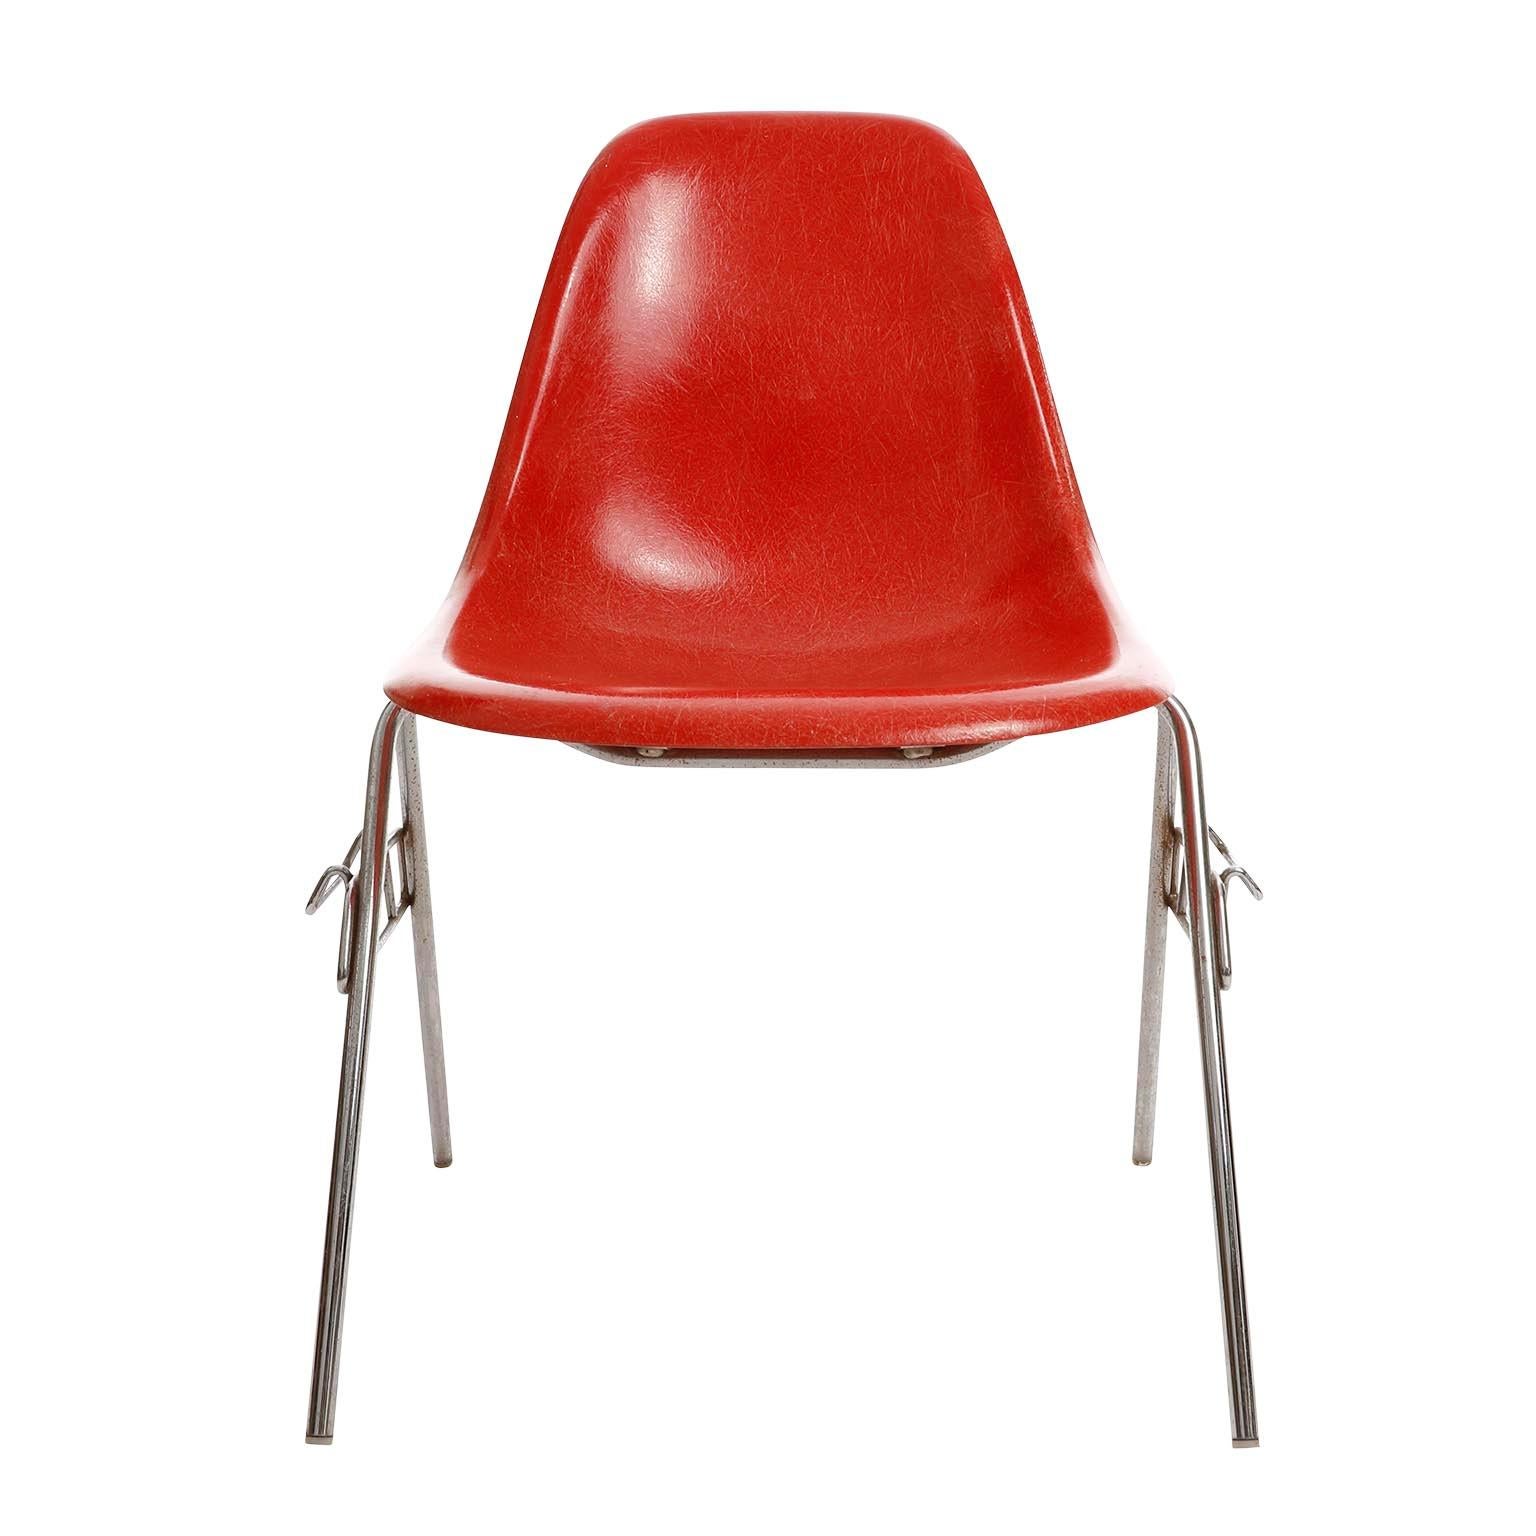 Mid-Century Modern Six chaises empilables Charles & Ray Eames, Herman Miller, Red Fiberglass, 1974. en vente